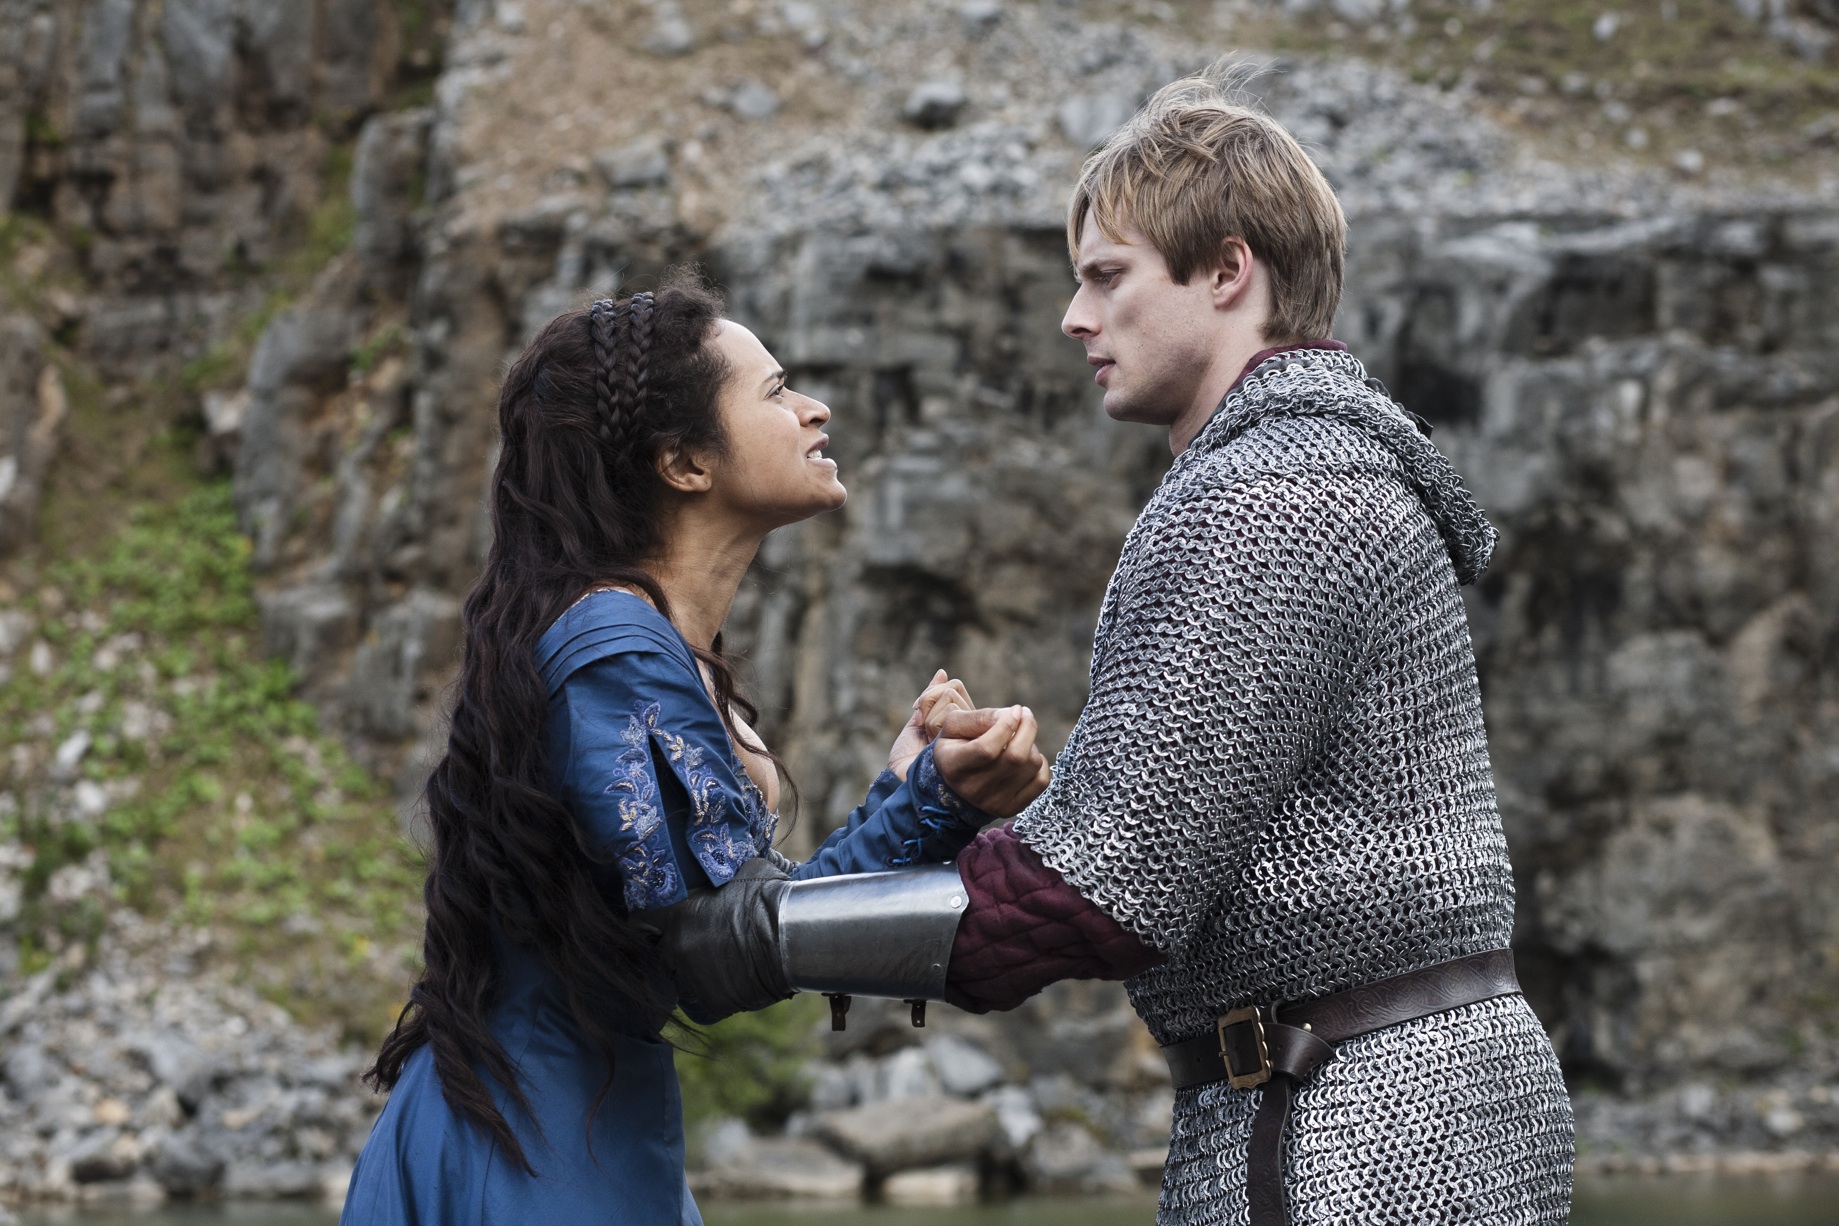 Merlin Season 5, Episode 9 Review: “With All My Heart”